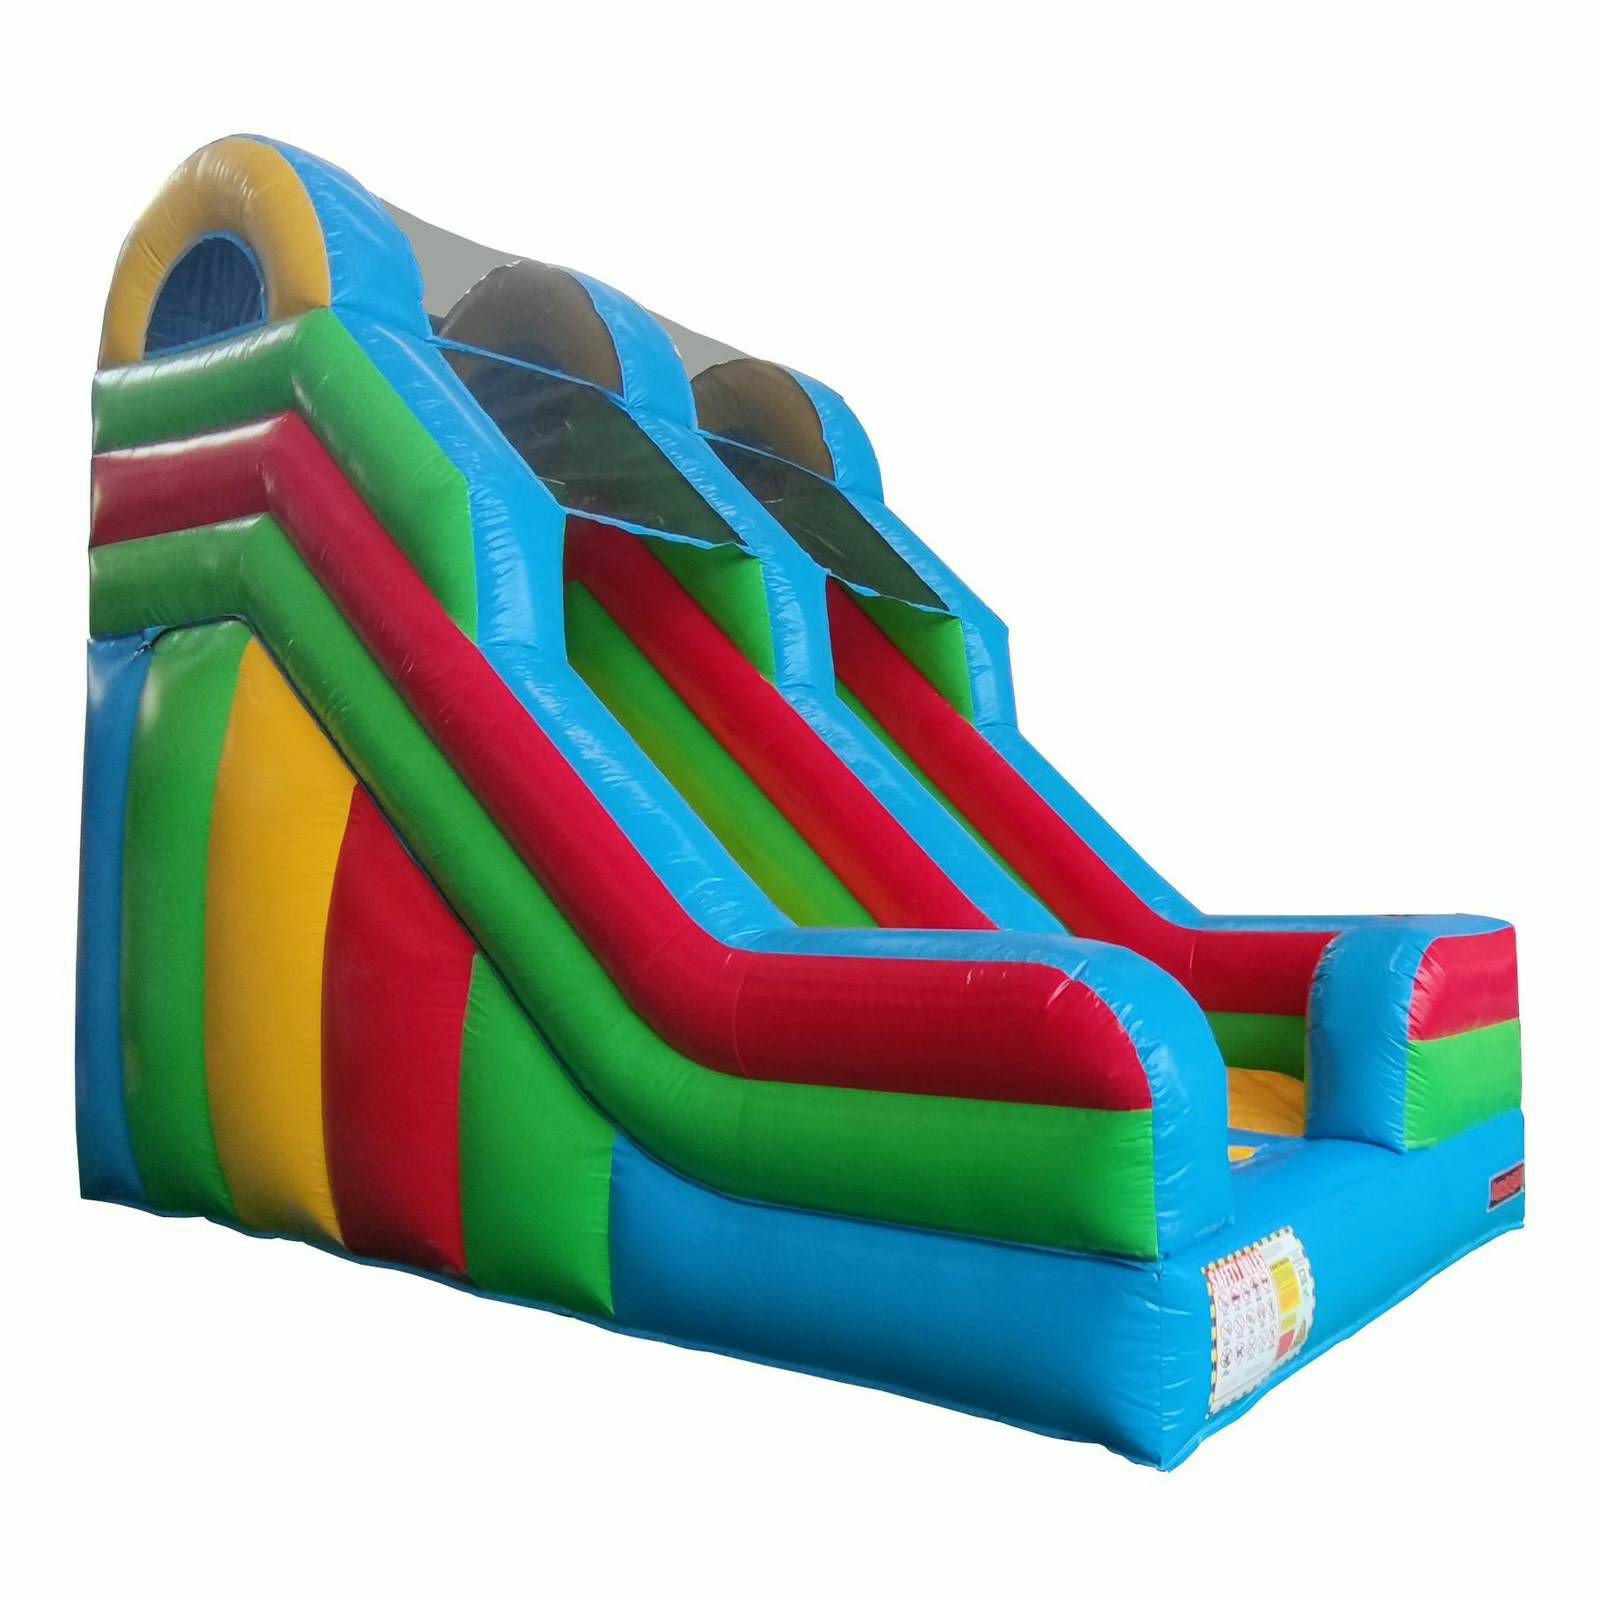 High and Colorful Slide Professional